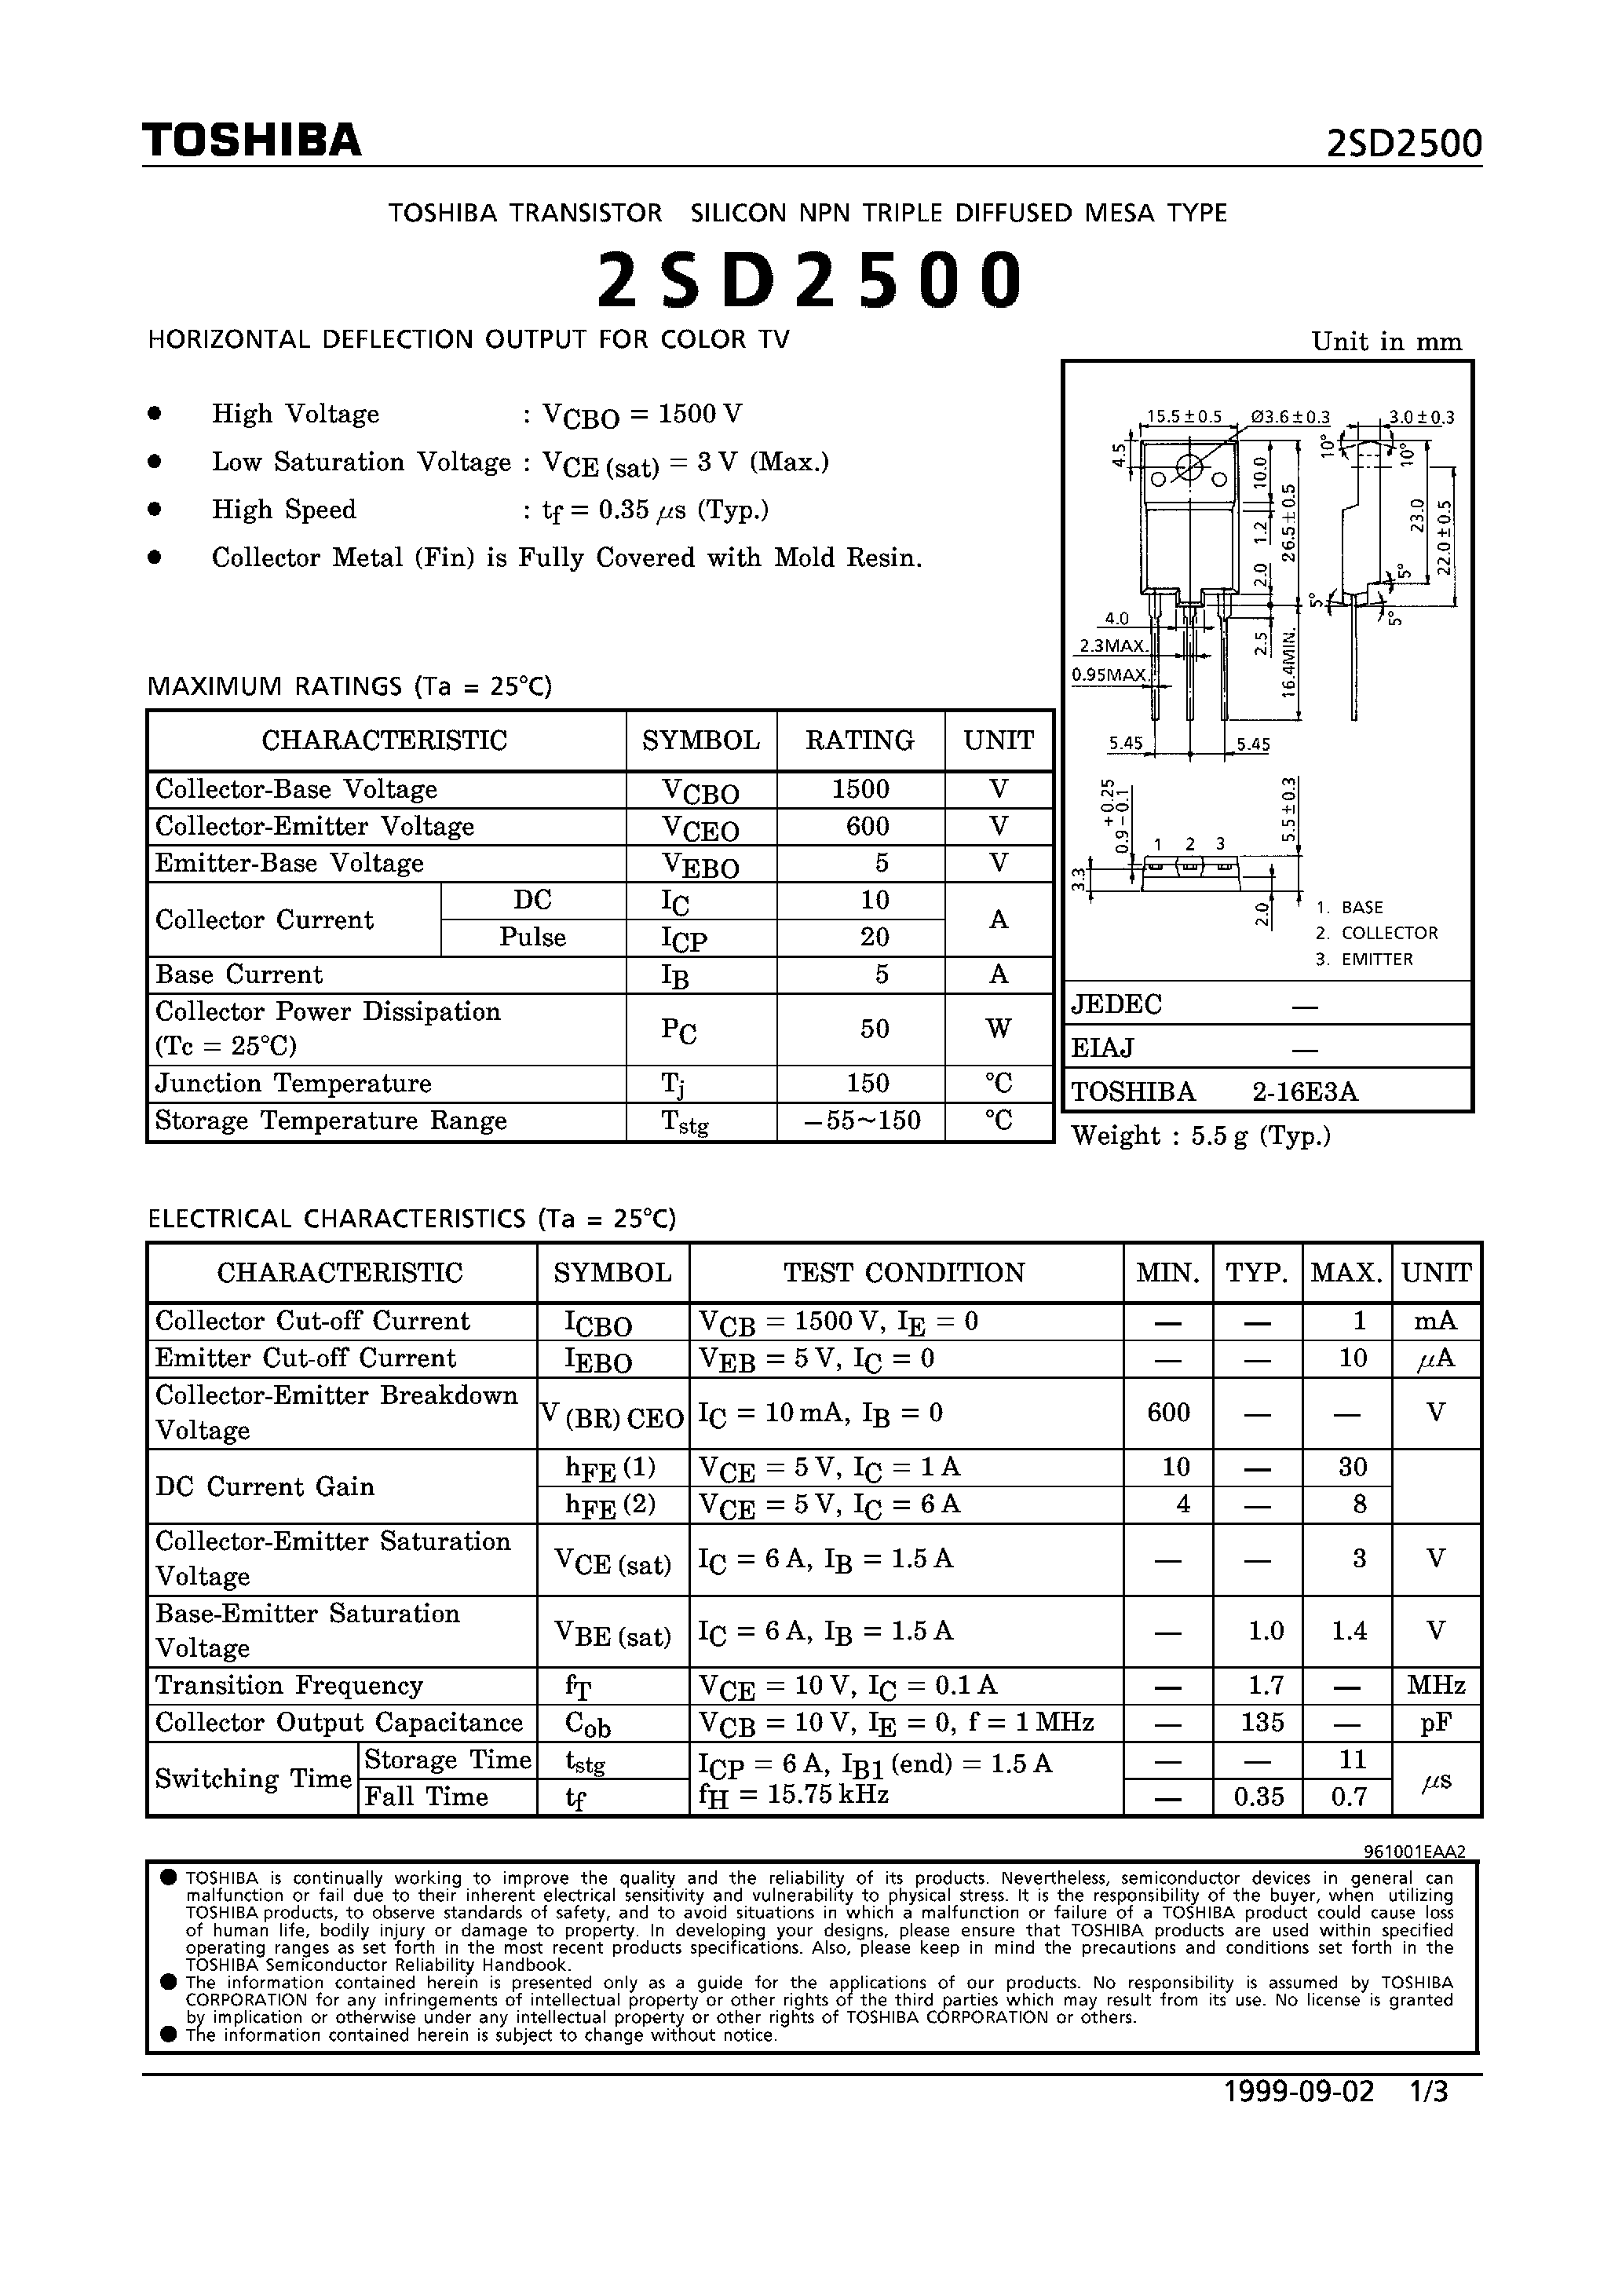 Datasheet 2SD2500 - NPN TRIPLE DIFFUSED MESA TYPE (GORIZONTAL DEFLECTION OUTPUT FOR COLOR TV) page 1